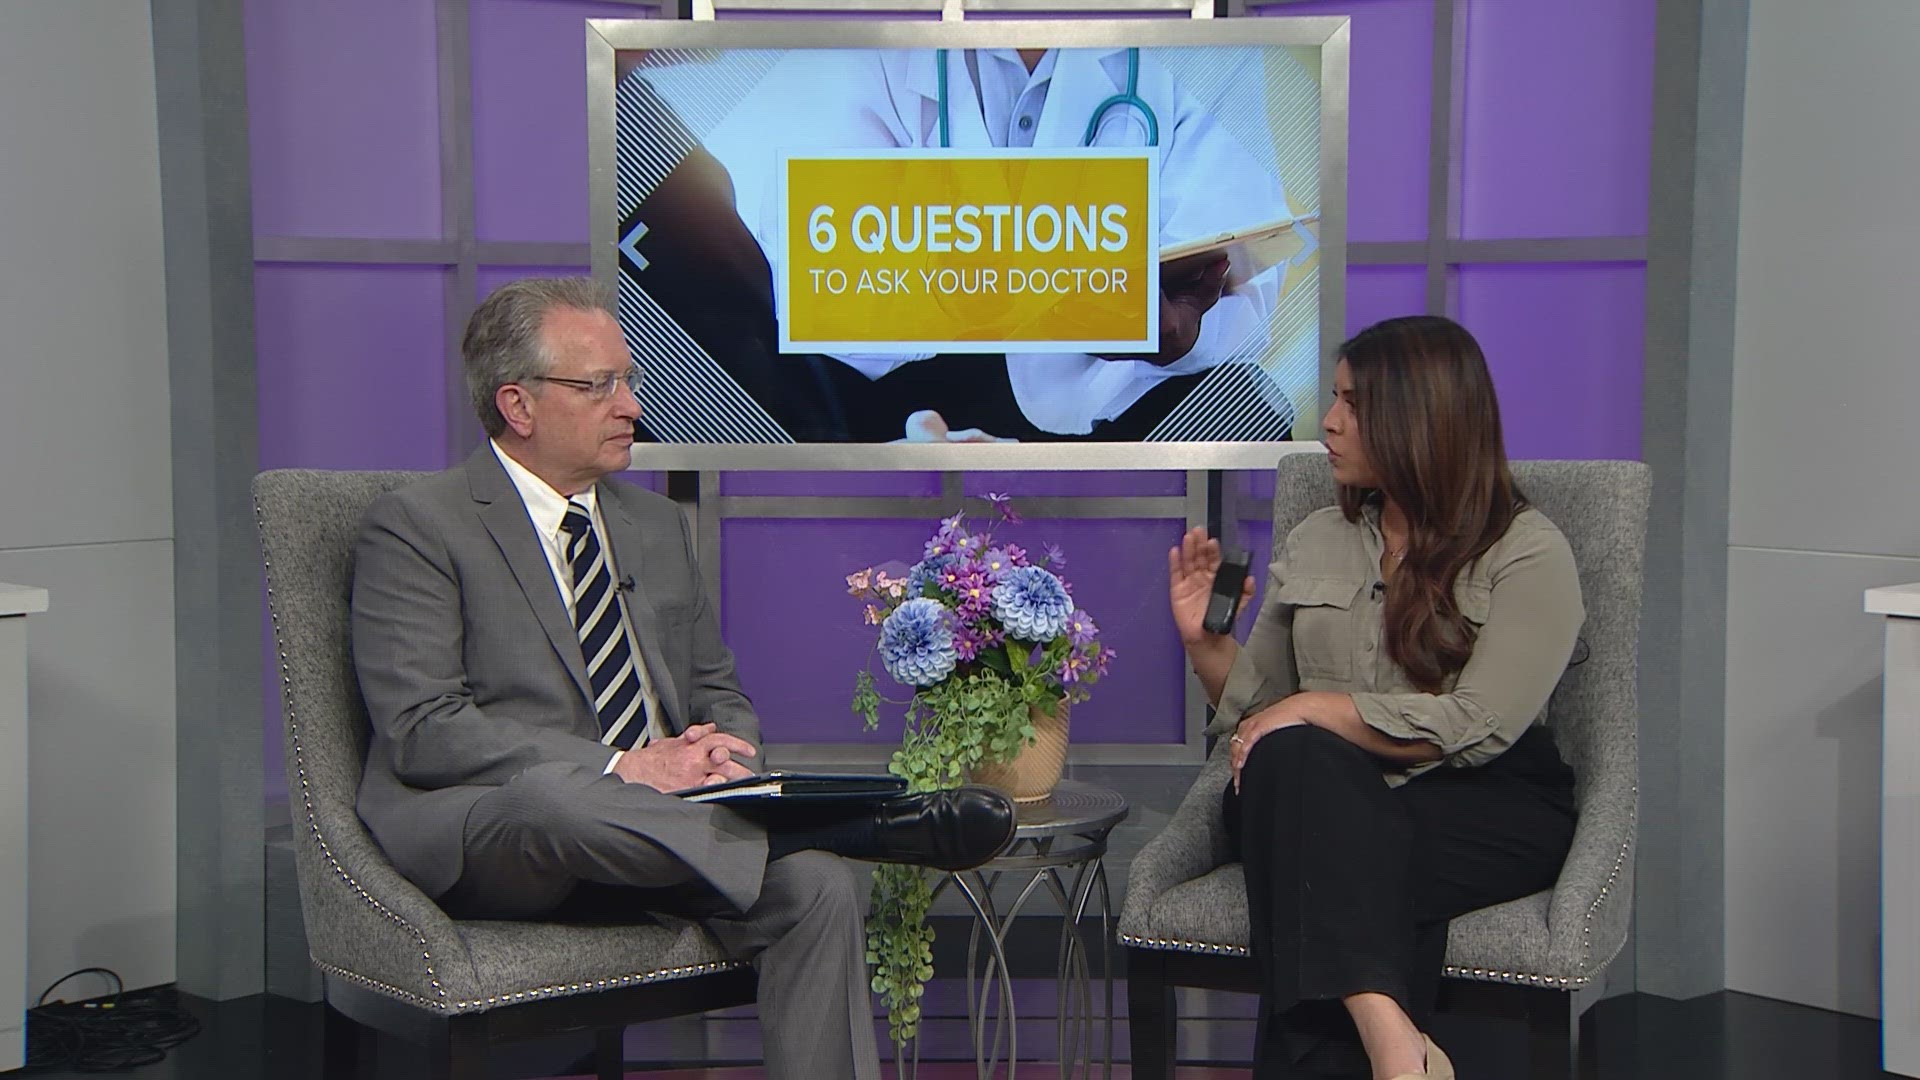 Jim Herlihy with the Colorado Alzheimer's Association joined us to talk through the questions you should ask your doctor about memory loss and changes in behavior.